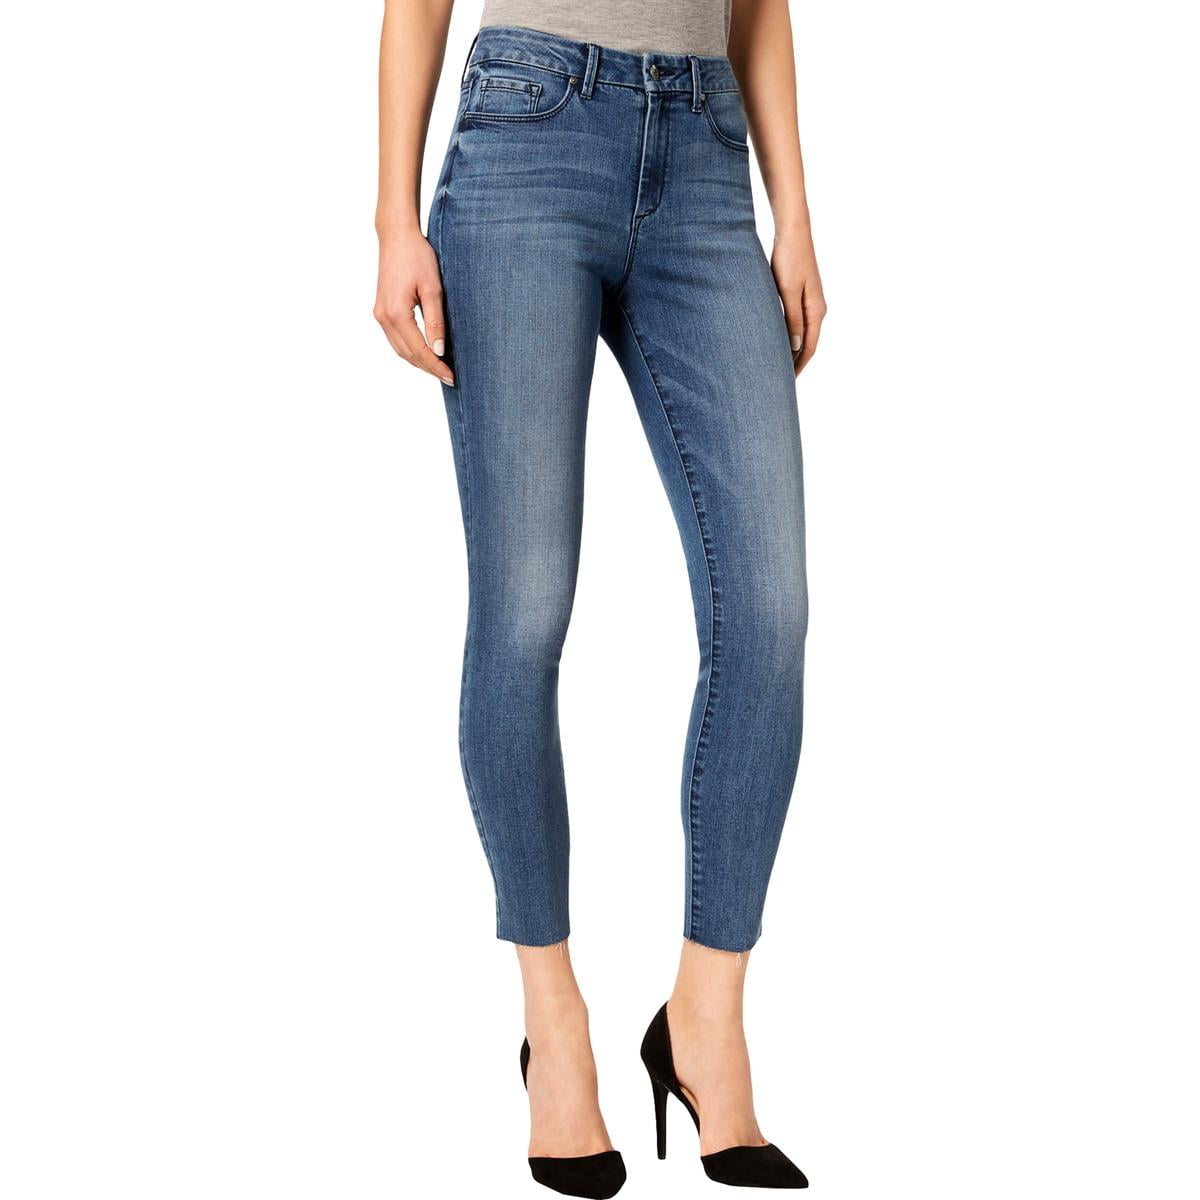 Jessica Simpson Womens Adored High Rise Ankle Skinny Jean Jeans ...